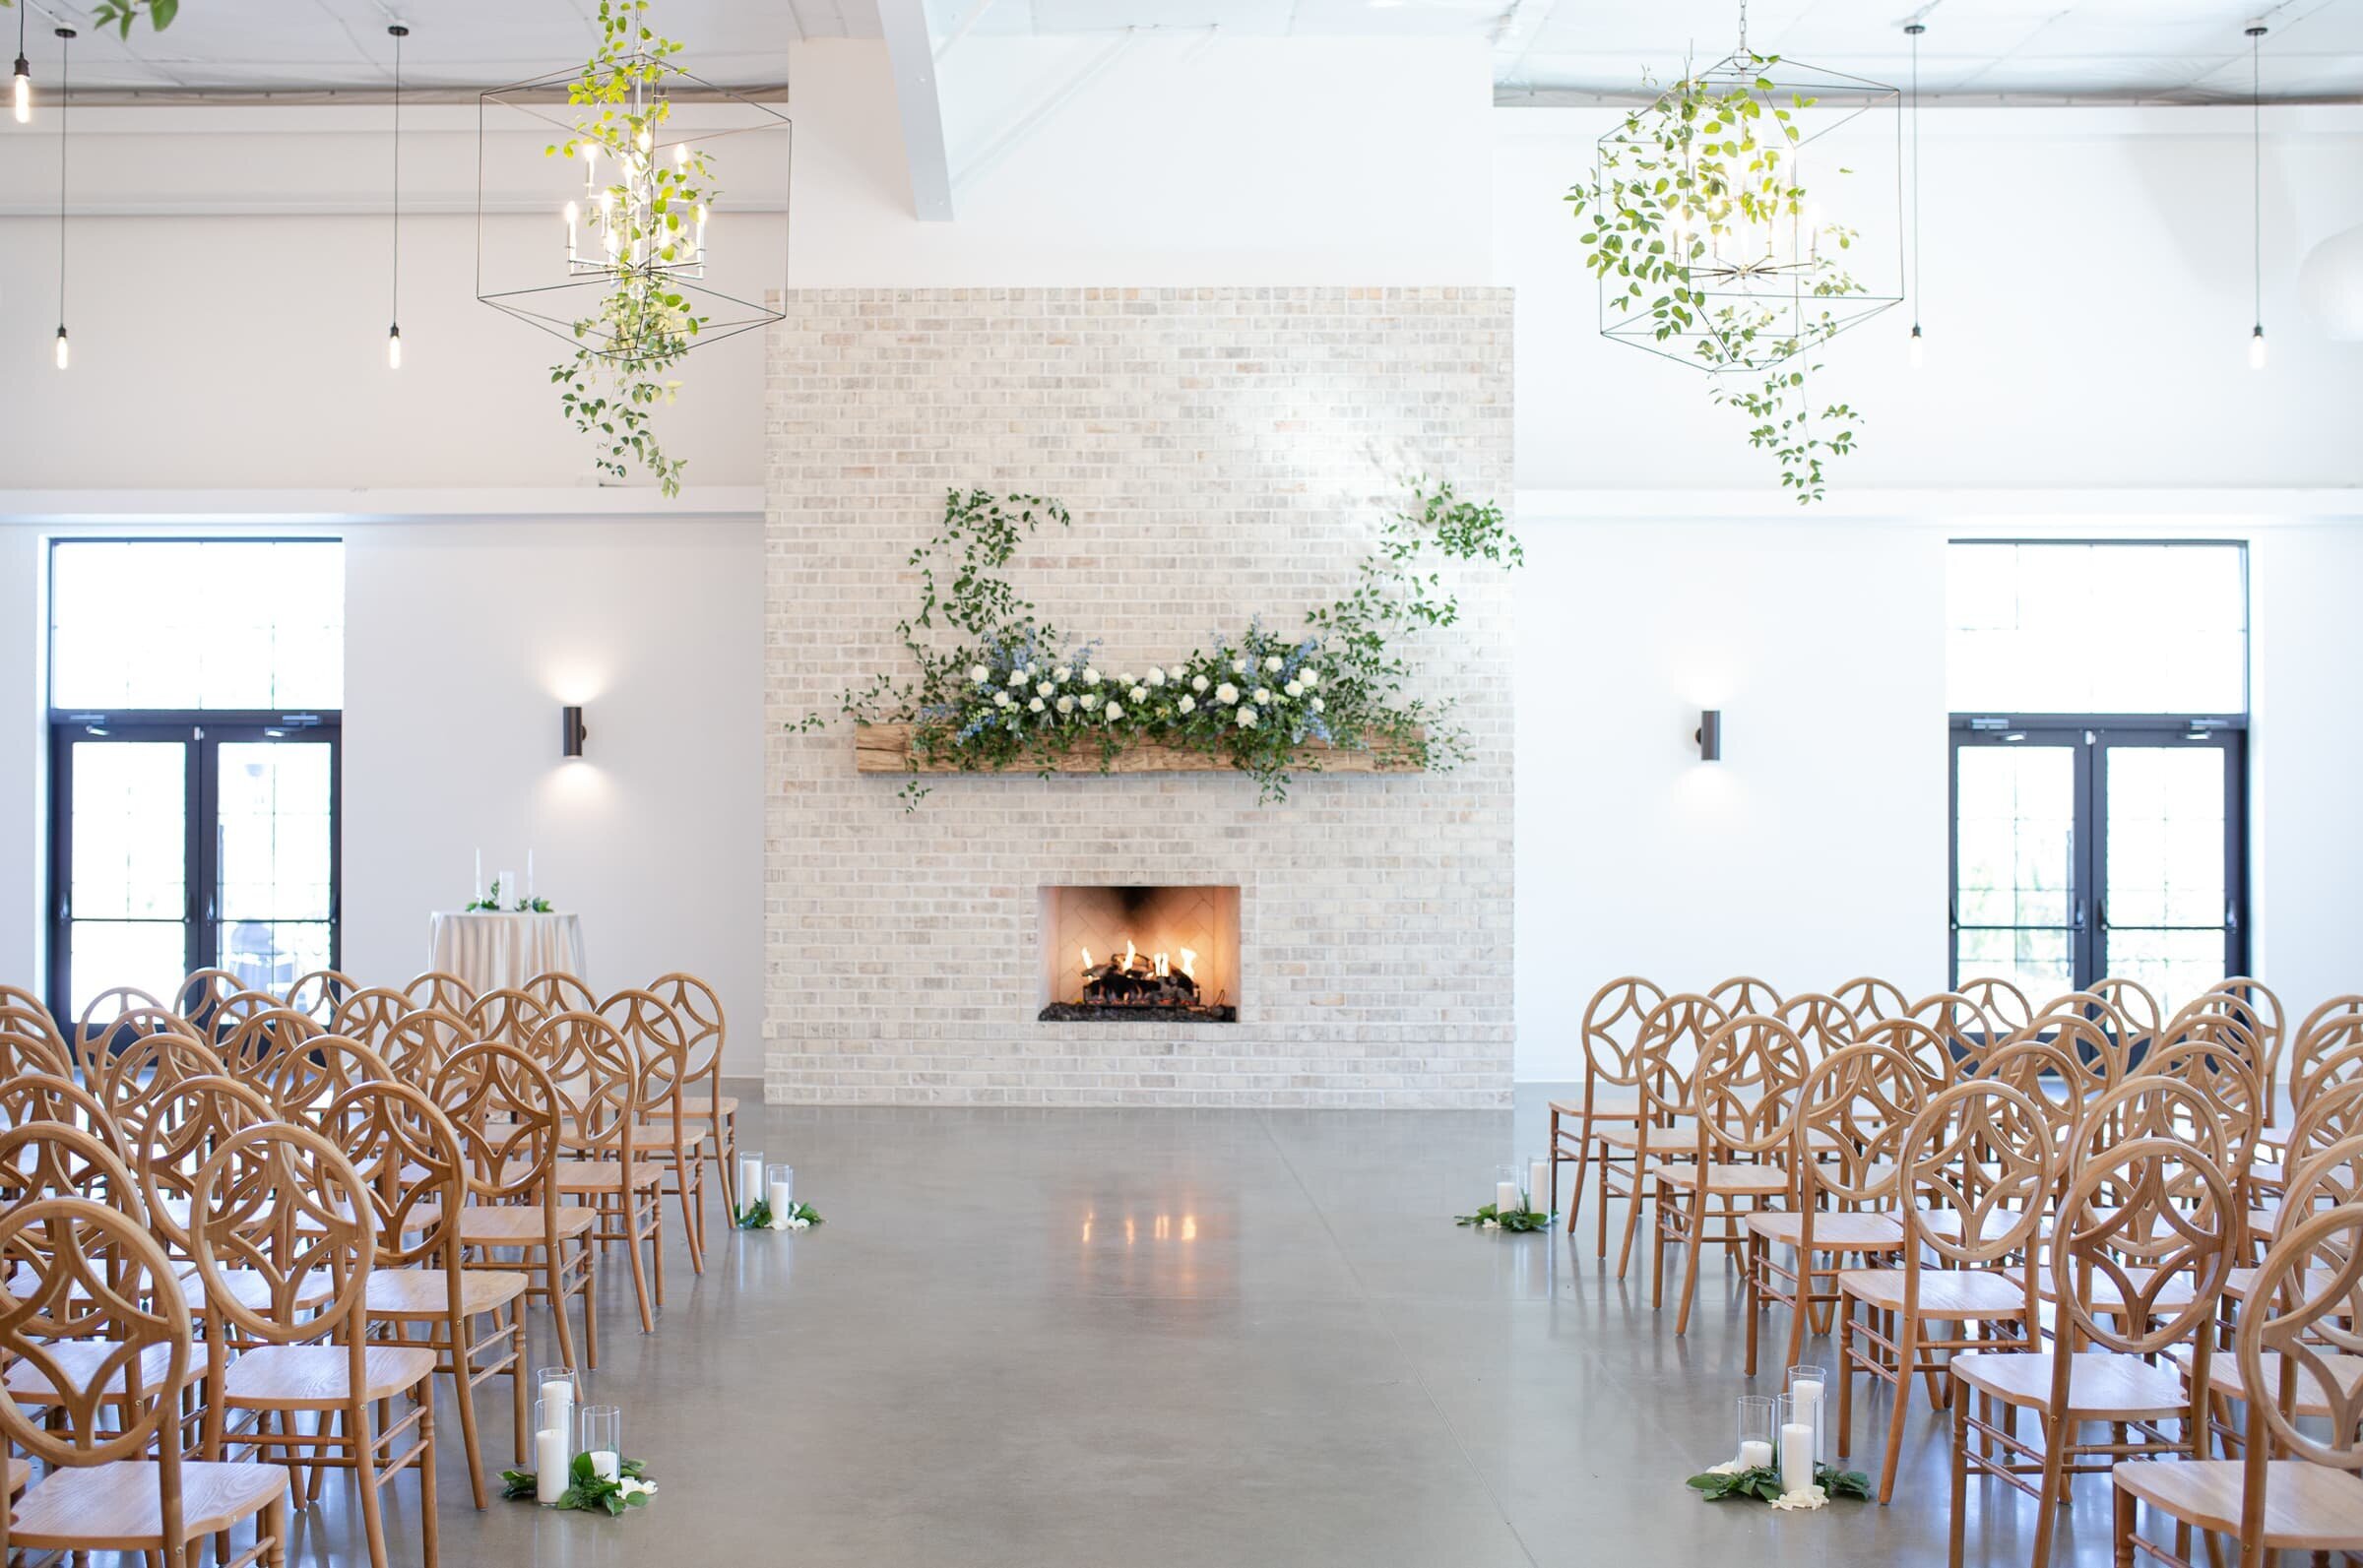 Indoor ceremony setup at the Maxwell Raleigh, NC. White and green floral arrangements, greenery ceiling installations, brown chiavari chairs.